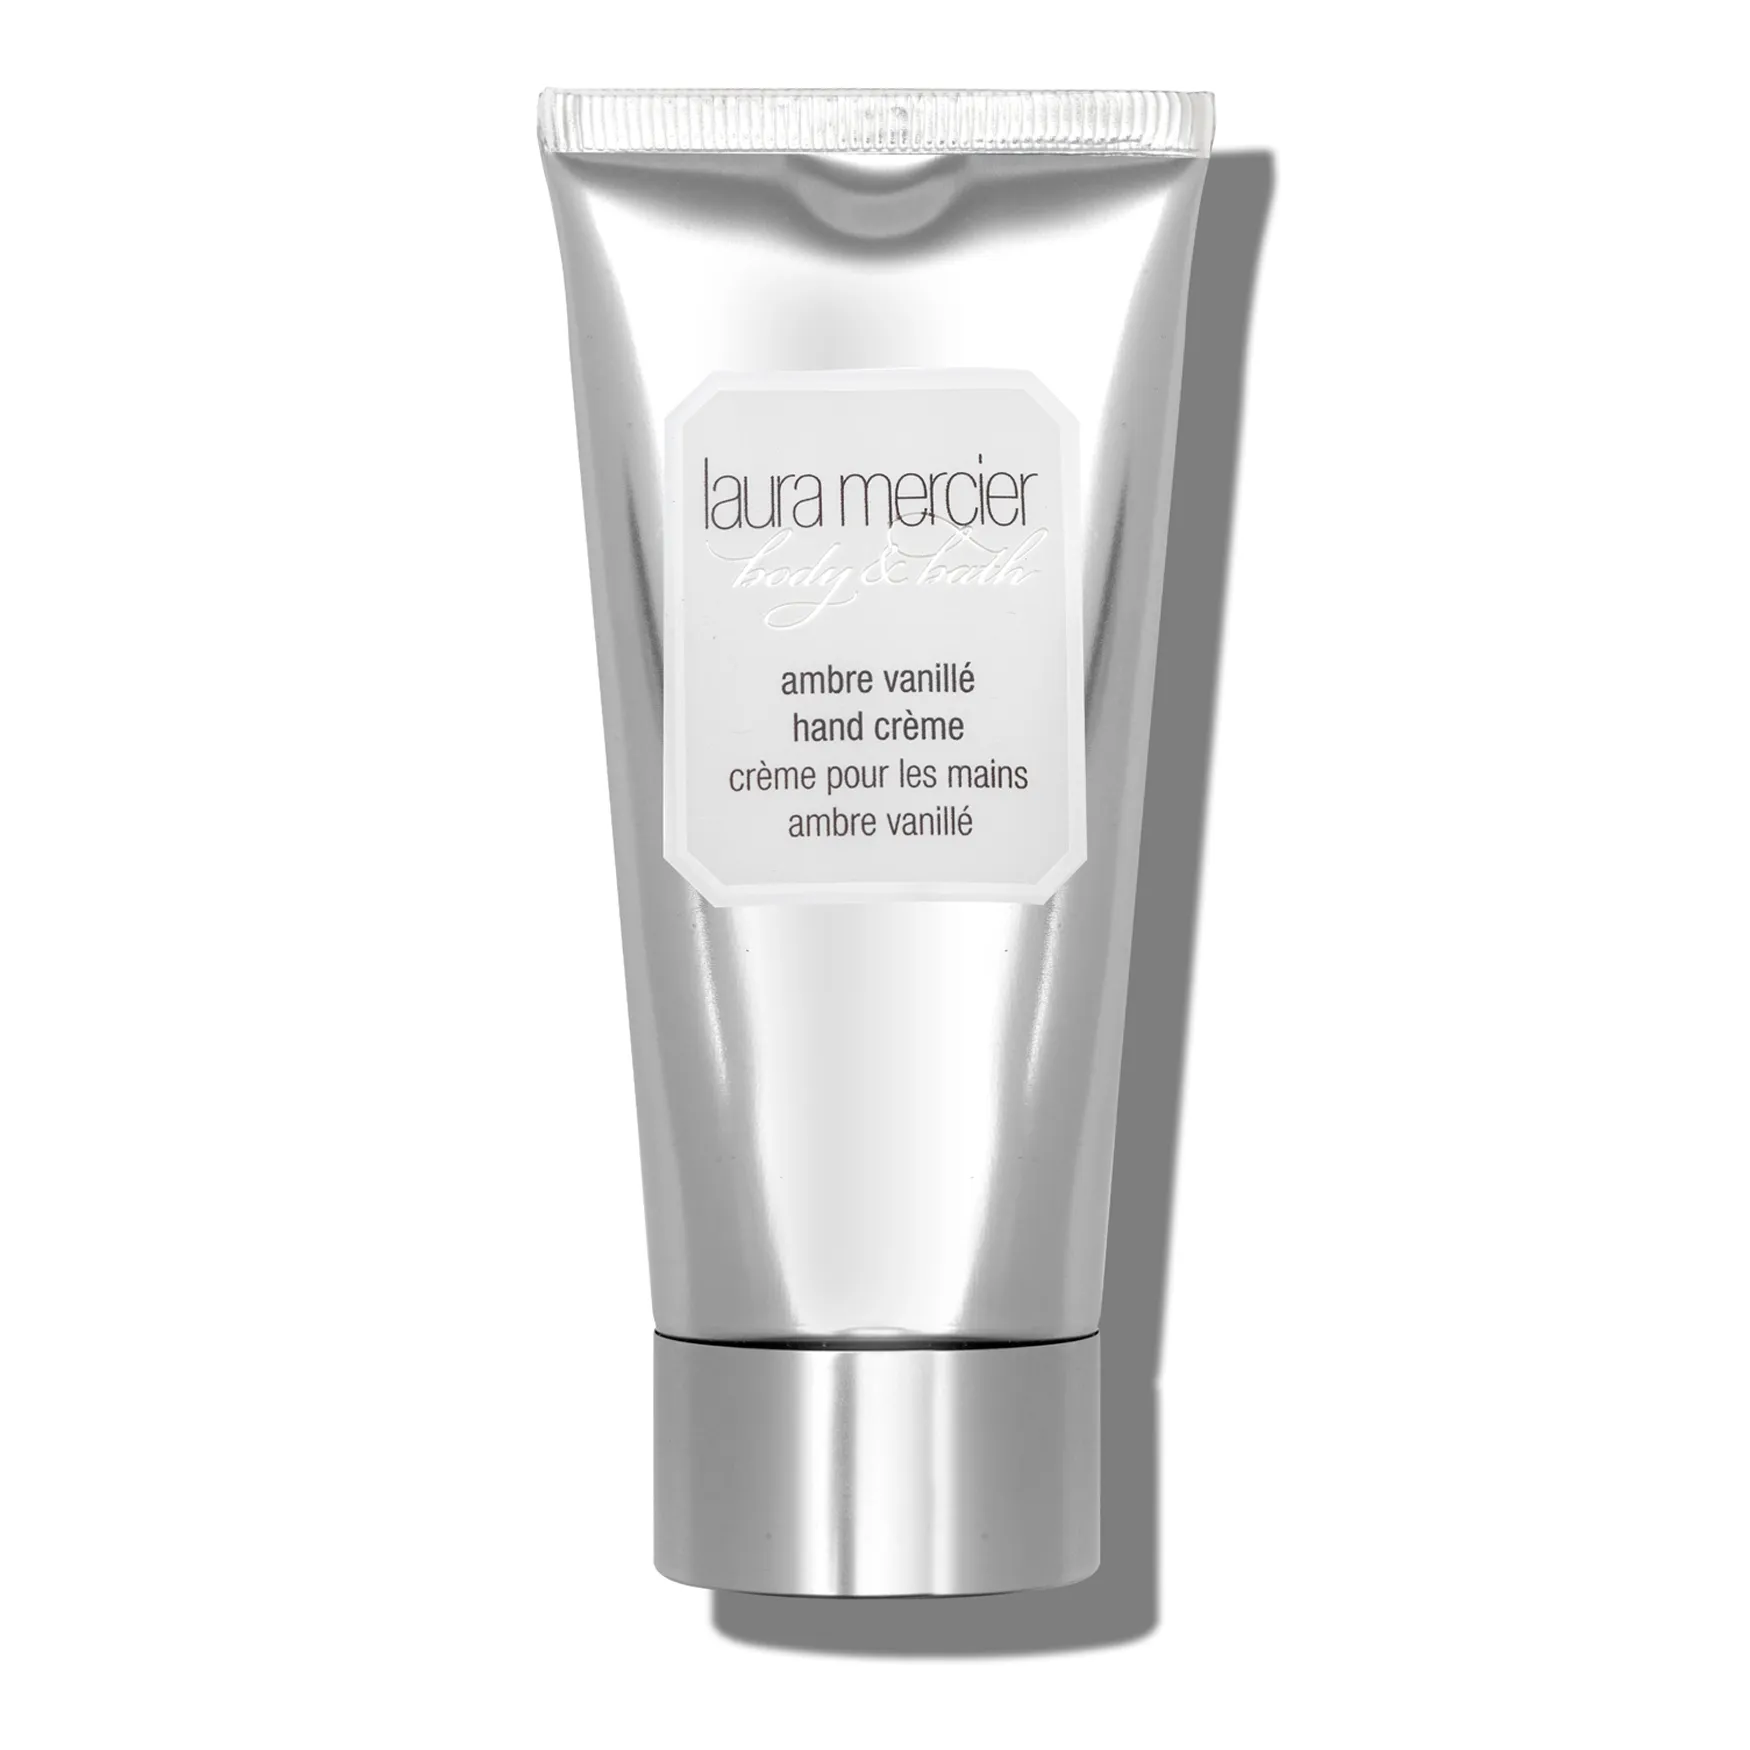 Ambre Vanille Hand Cream by Laura Mercier, the best (affordable) luxury French hand cream.